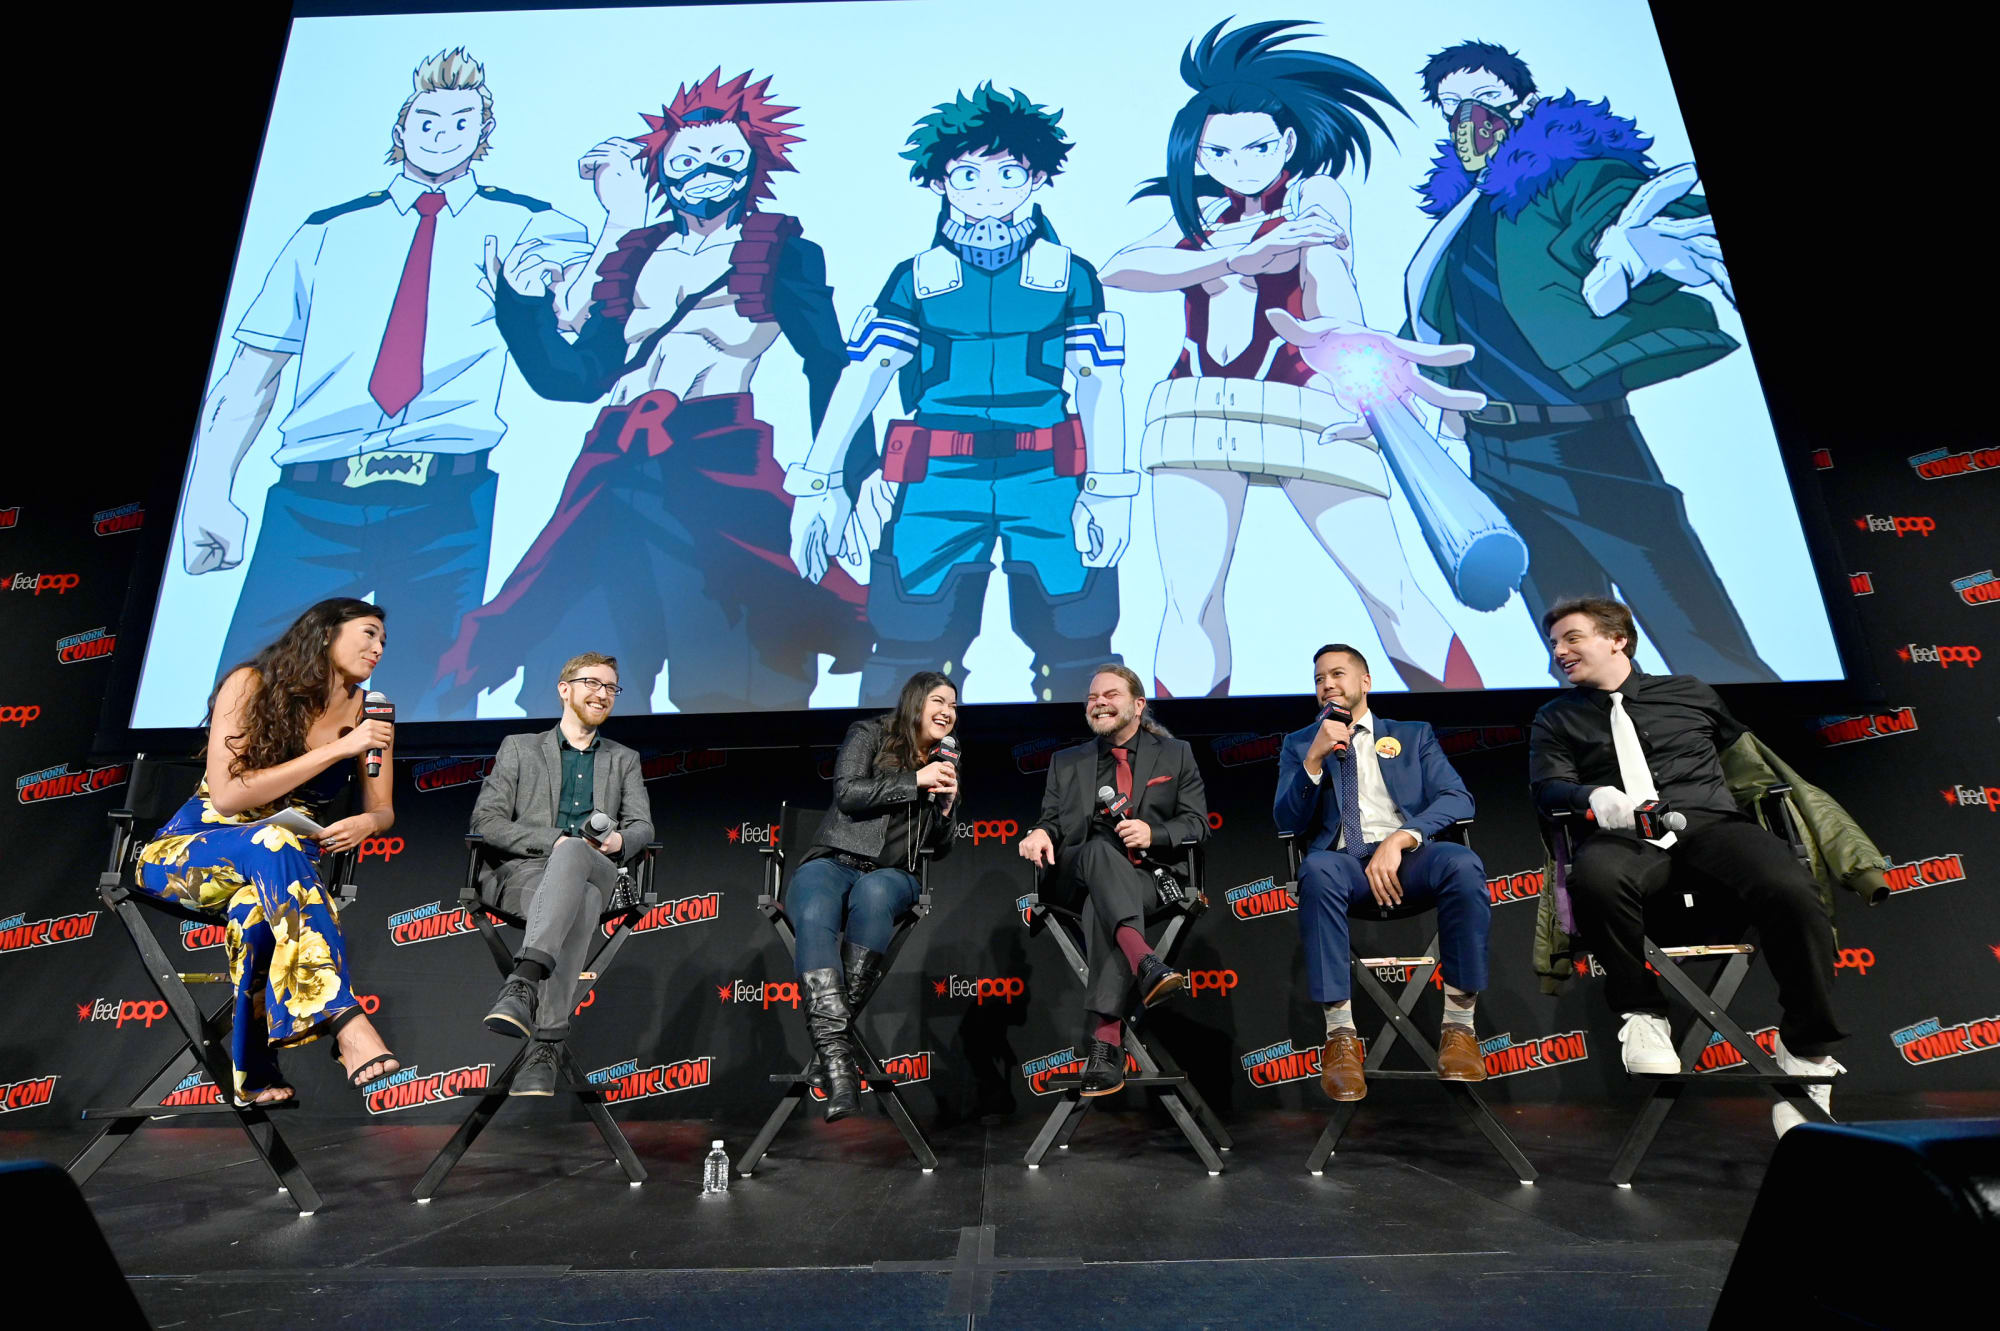 My Hero Academia season 4 episodes 5-6 review: A debut and an investigation